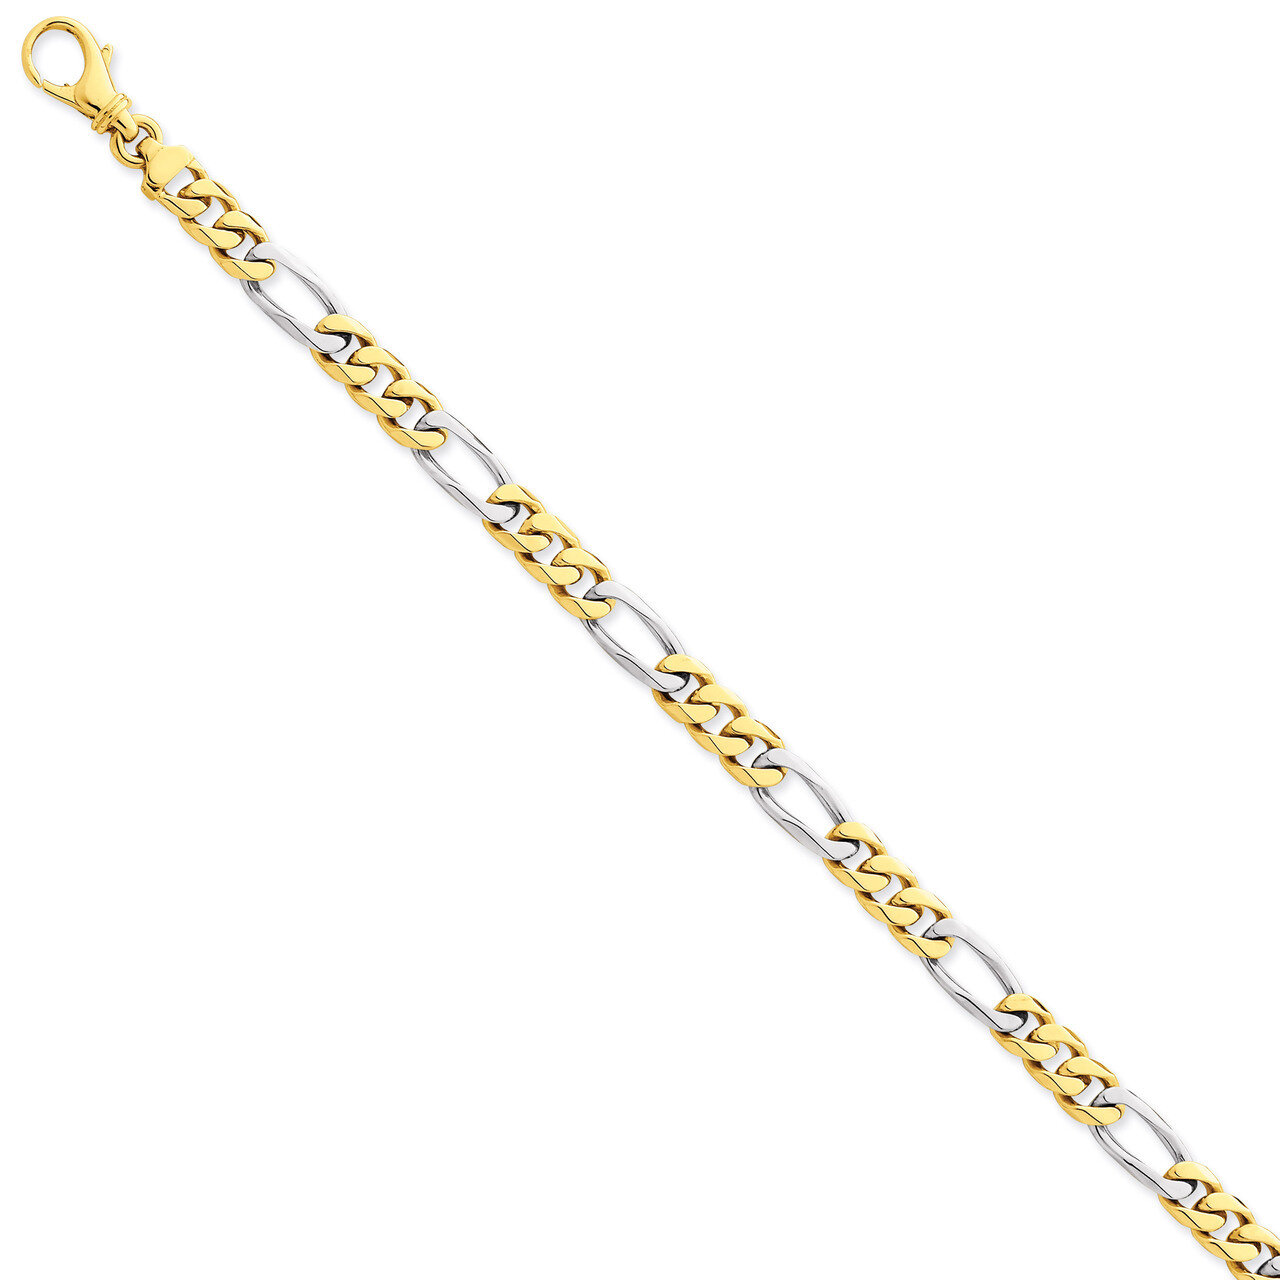 6.2mm Polished Fancy Link Chain 9 Inch 14k Two-Tone Gold LK488-9